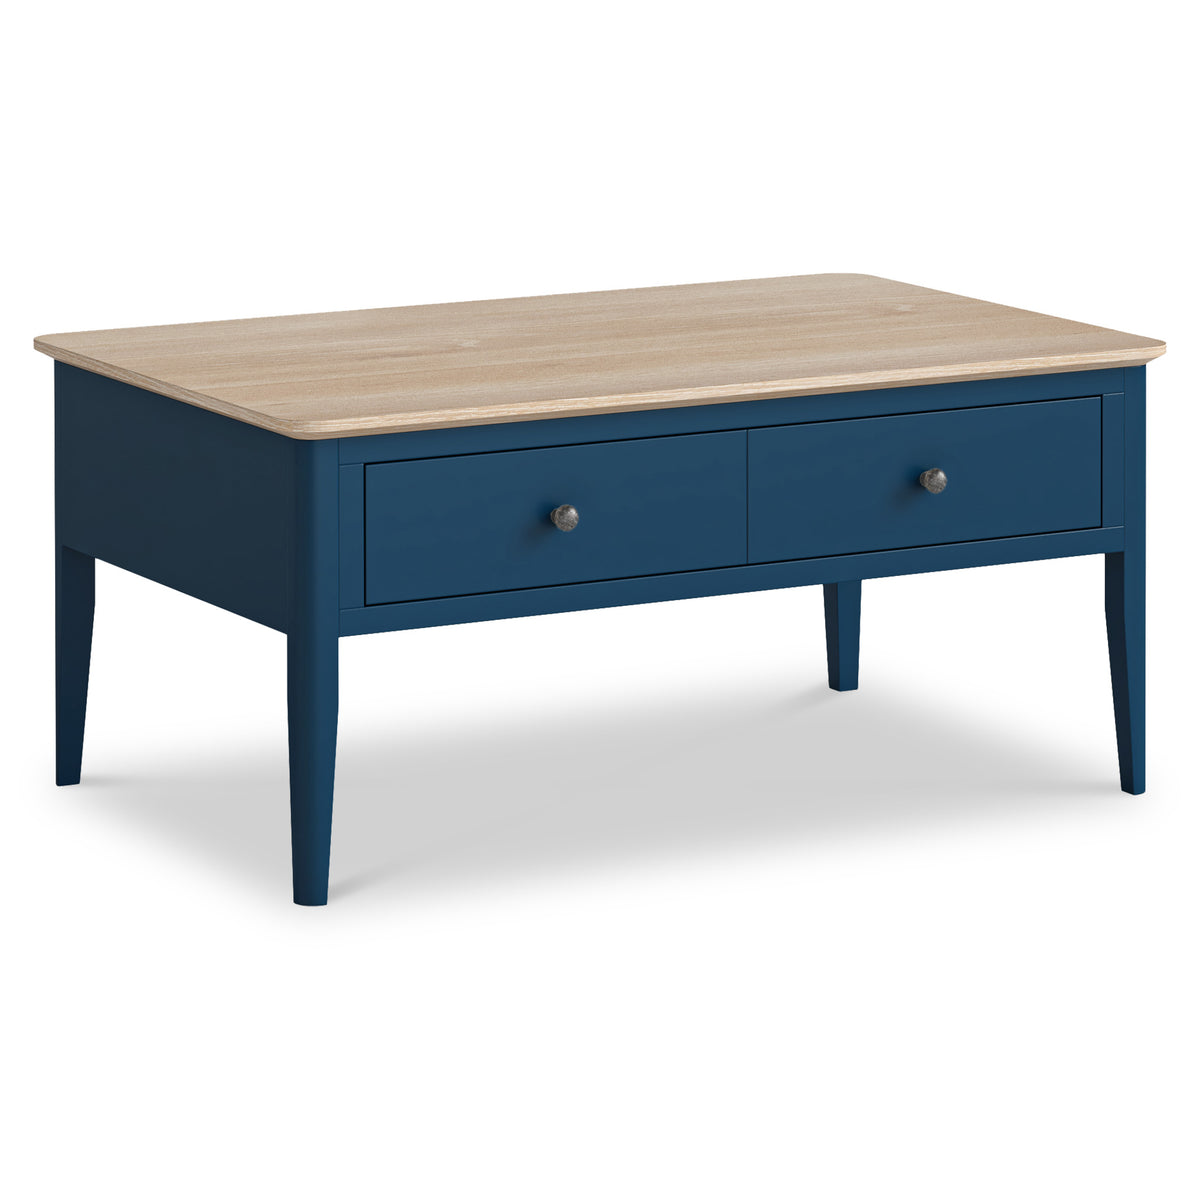 Penrose Navy Blue Coffee Table with metal handles from Roseland Furniture